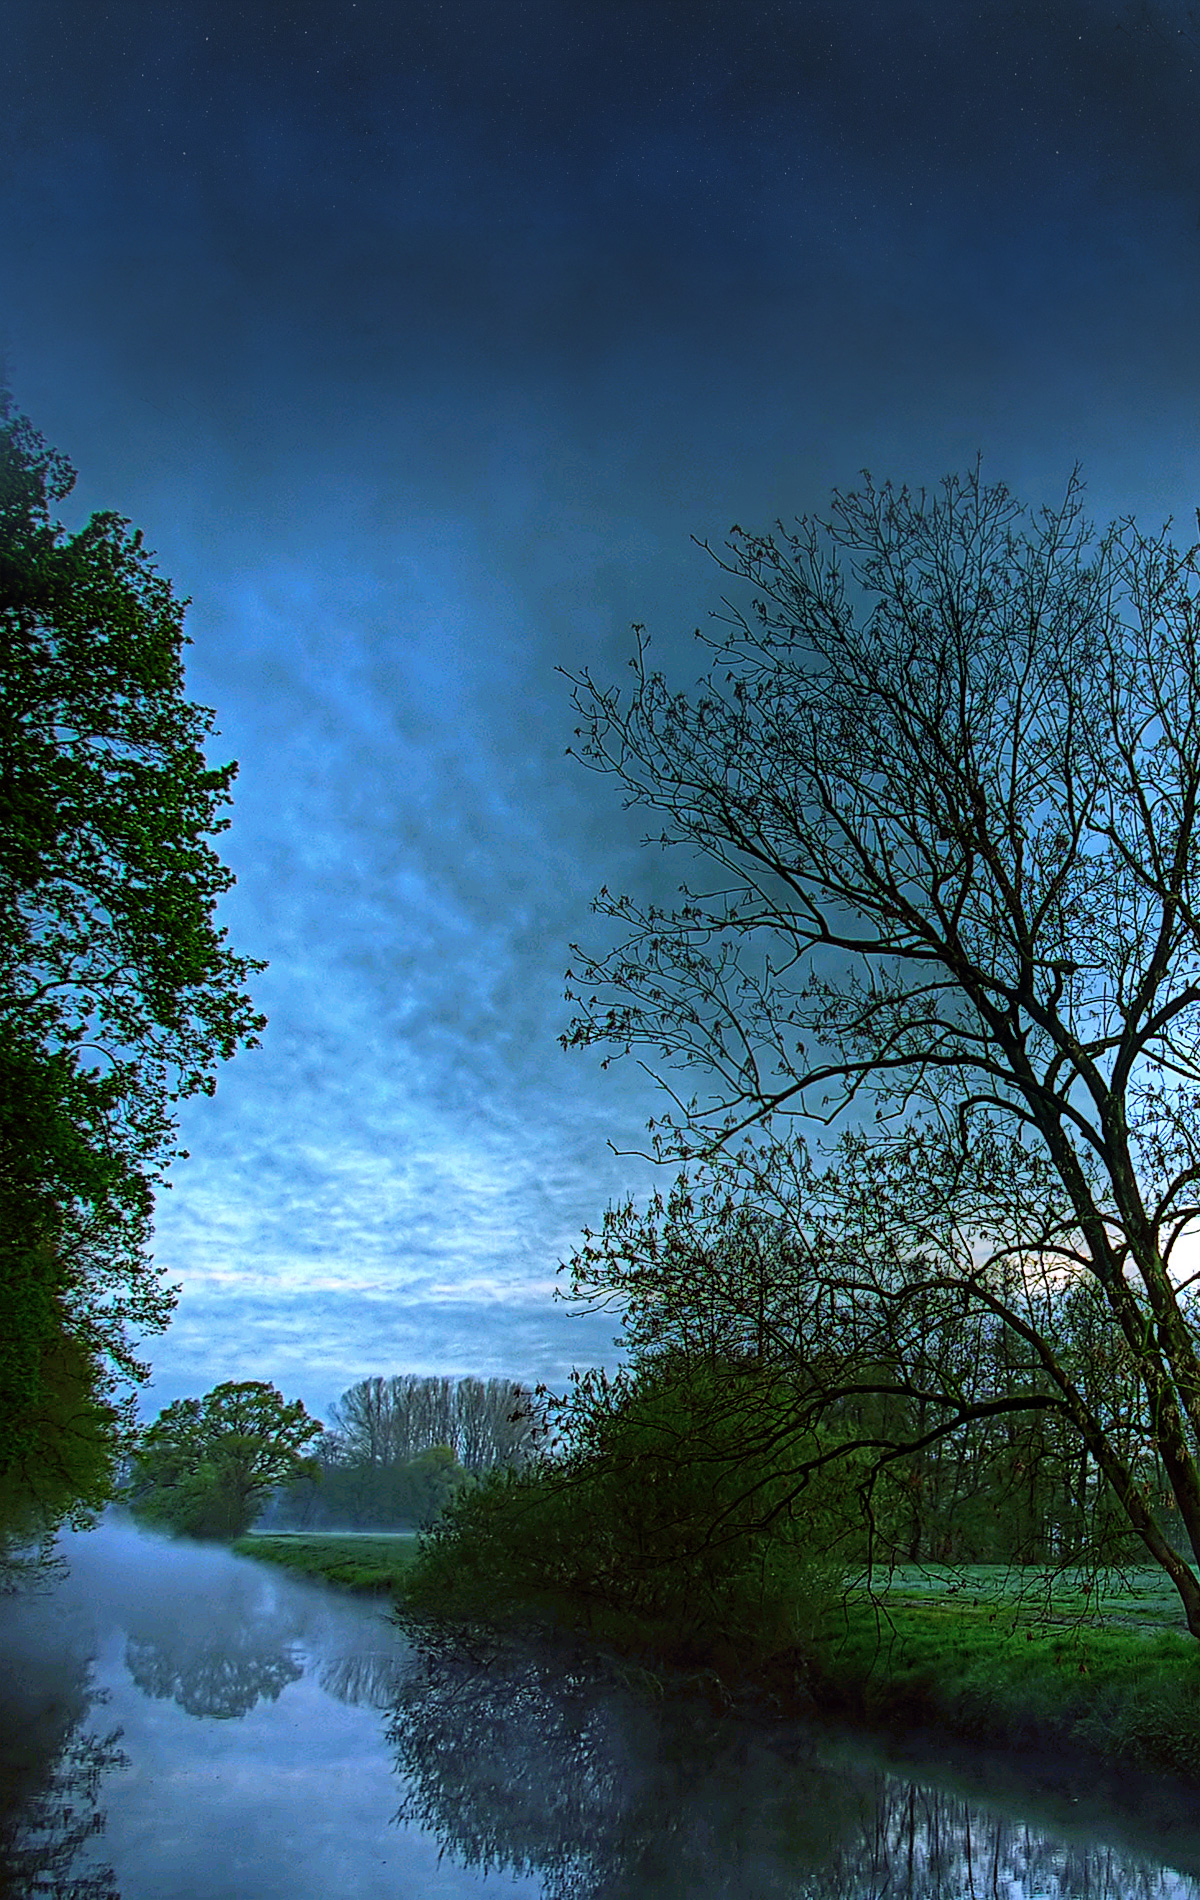 Free Download Tree Lined River At Sunset Under Blue Sky And Clouds